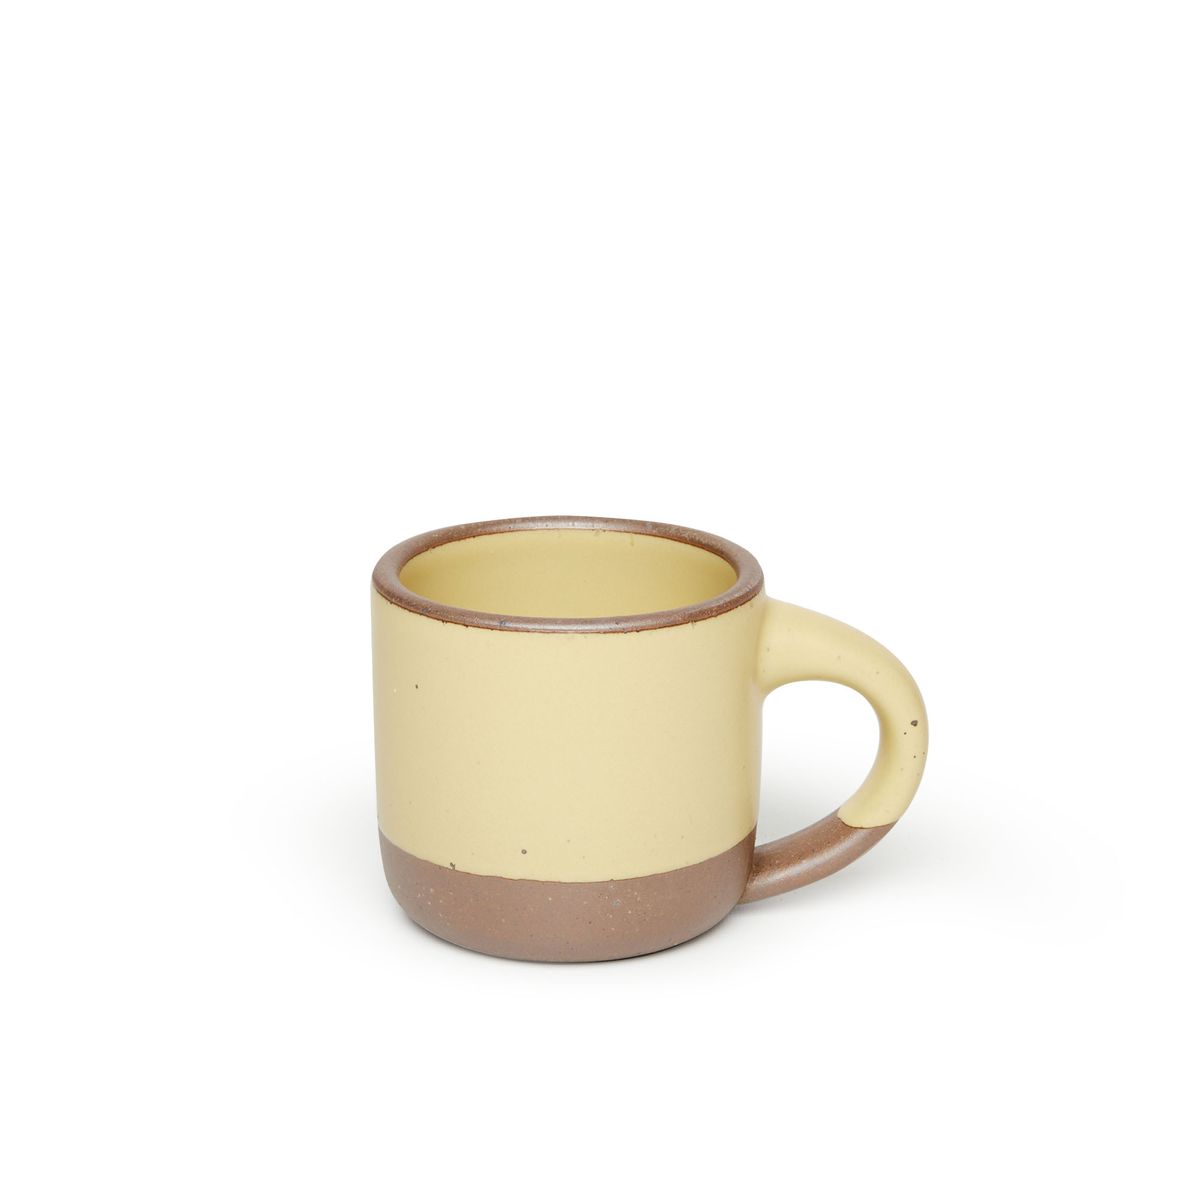 A small sized ceramic mug with handle in a light butter yellow glaze featuring iron speckles and unglazed rim and bottom base